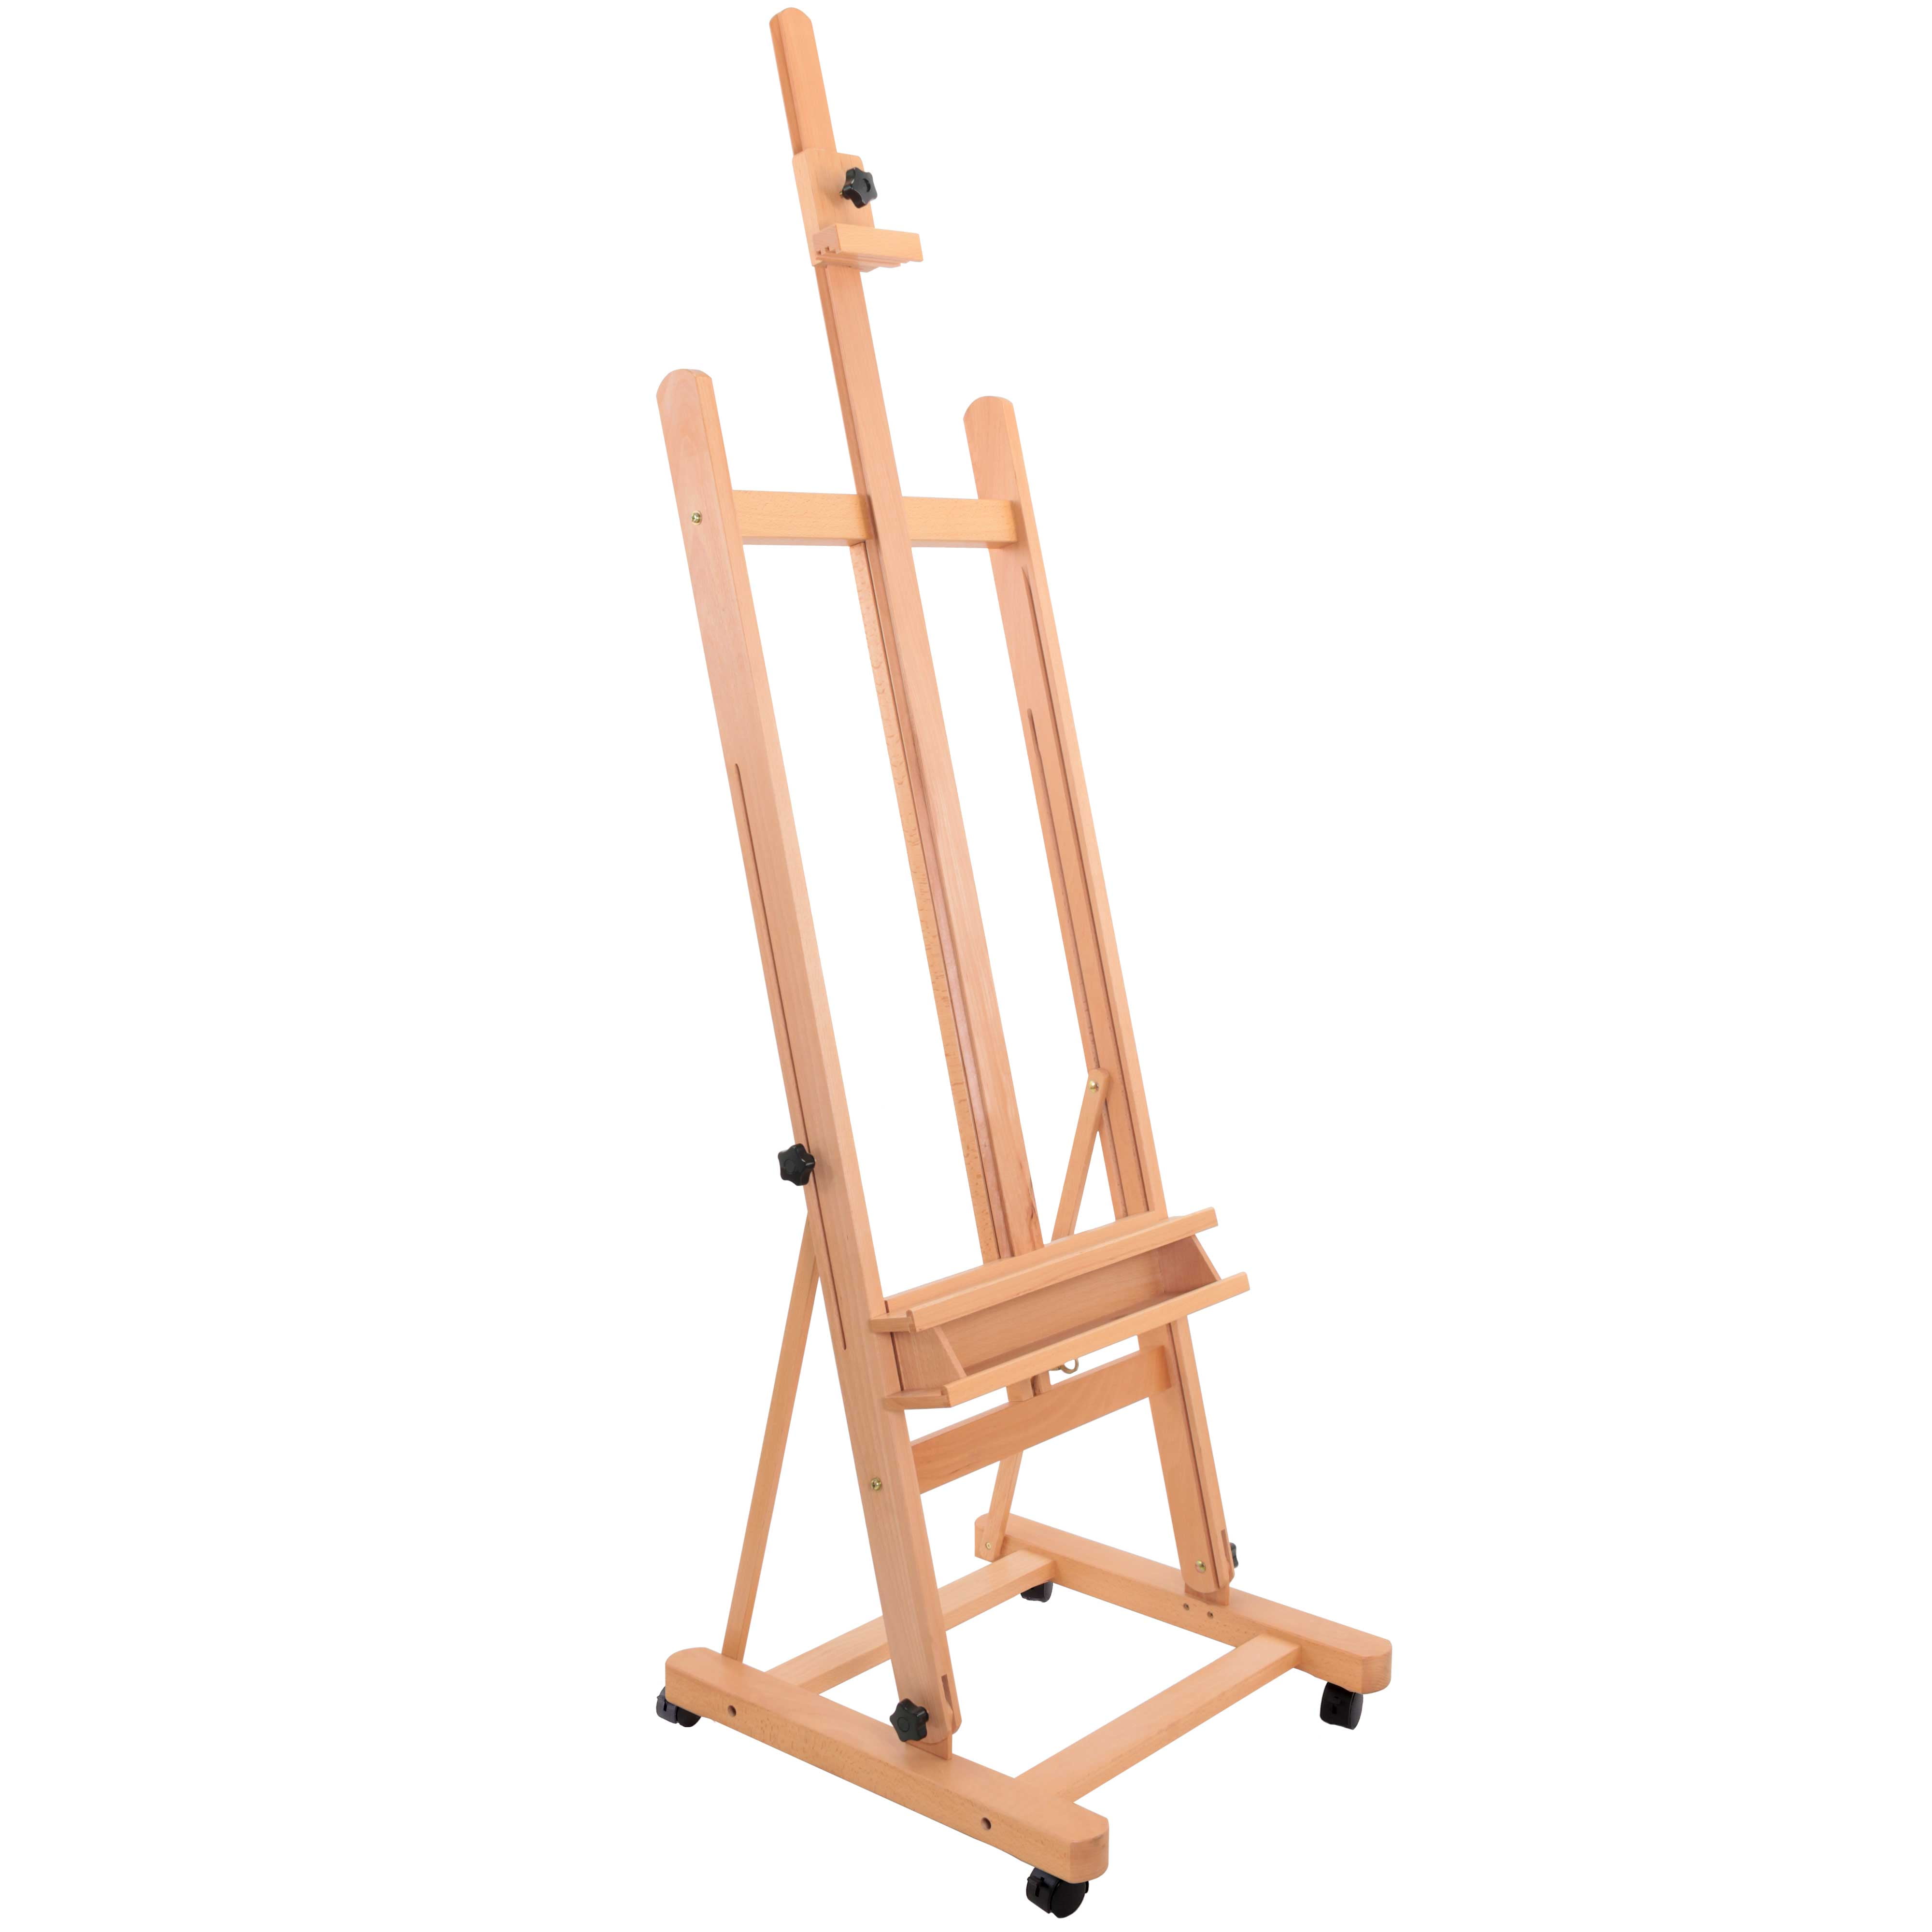 Easel Stands with Canvases  Easel, Art easel, Wooden easel